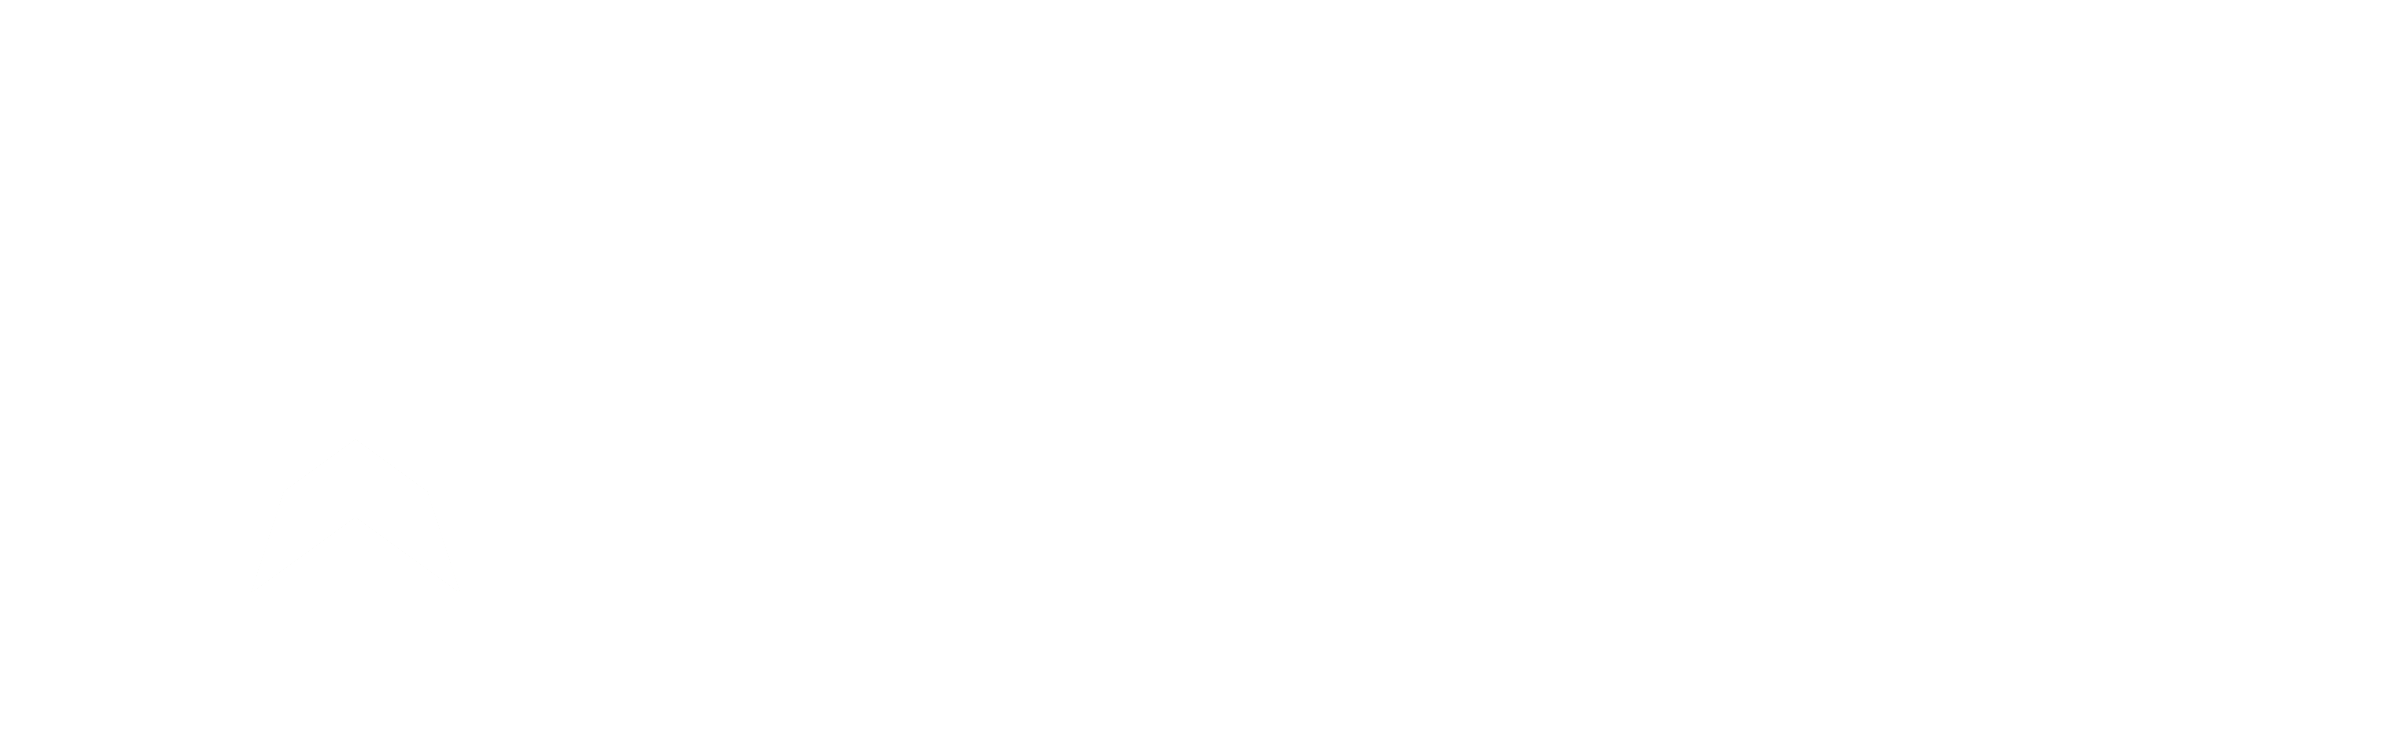 Ayusa by intrax